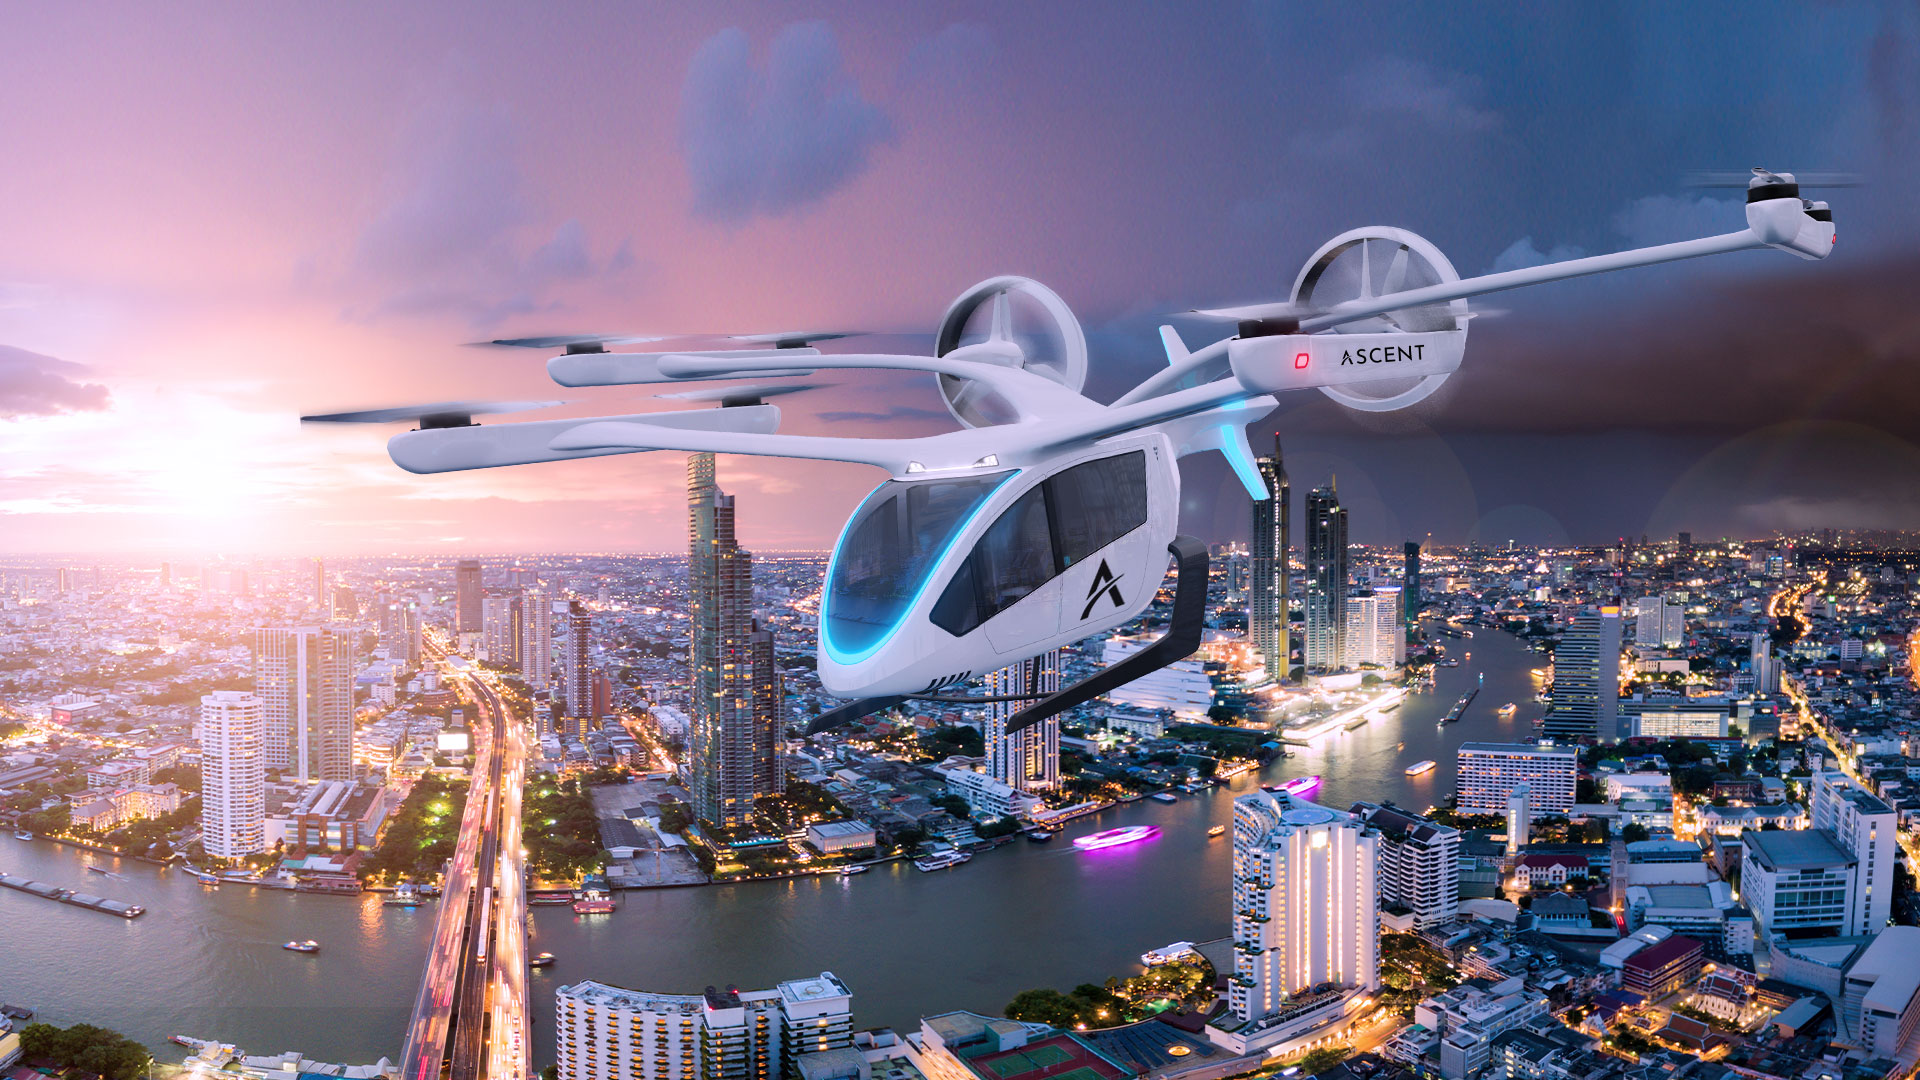 Eve Urban Air Mobility announces partnership with Ascent